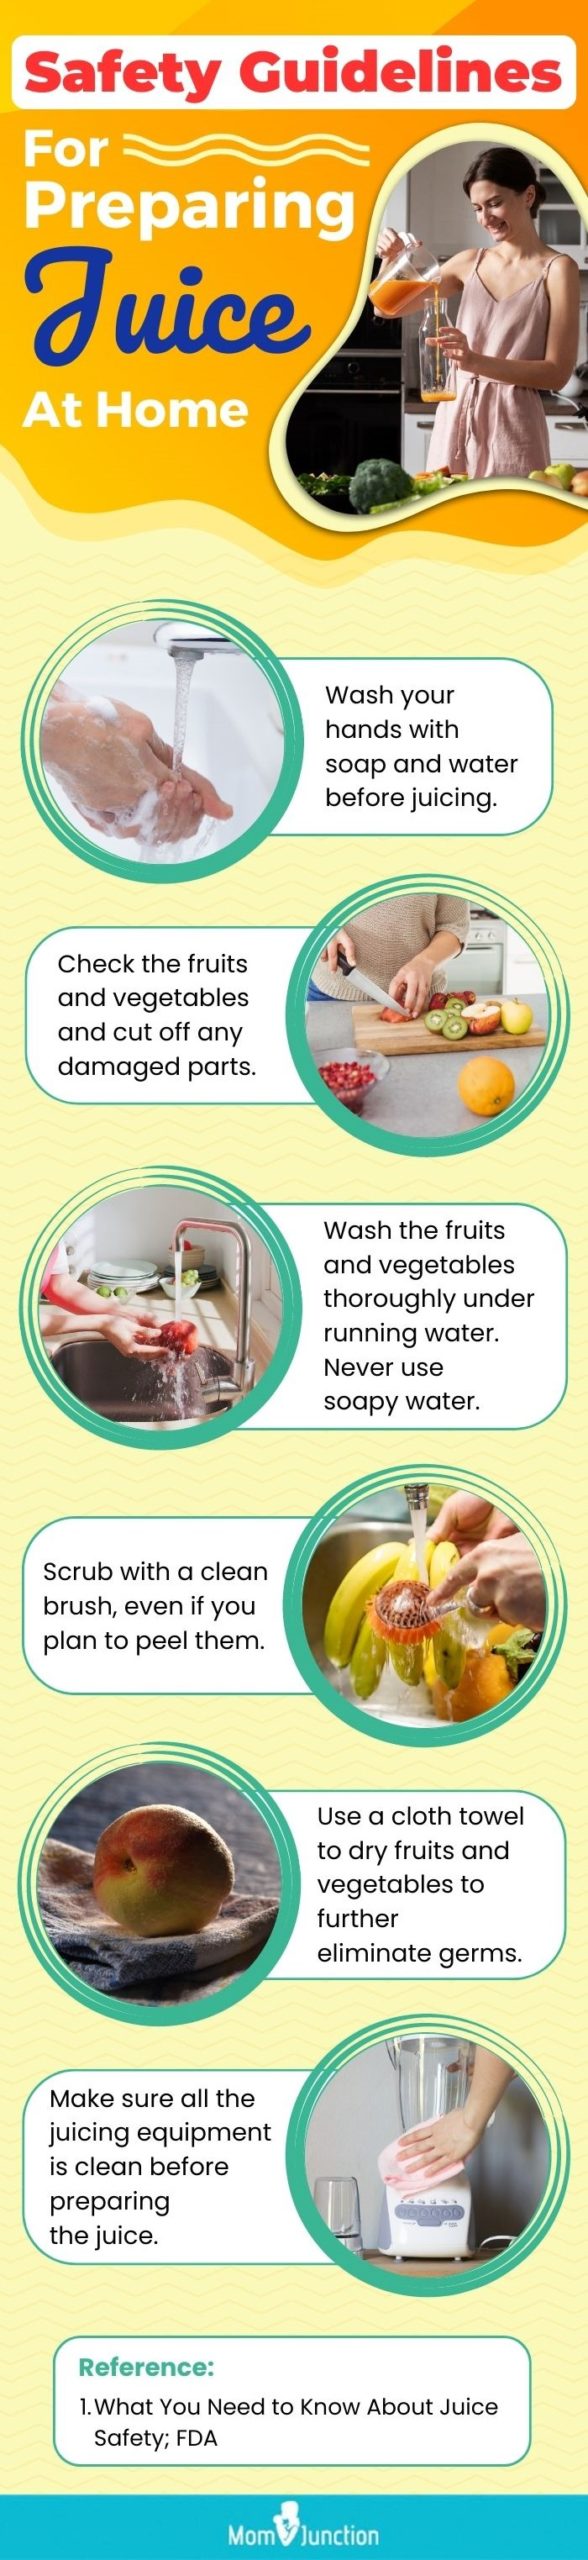 Safety Guidelines For Preparing Juice At Home(infographic)